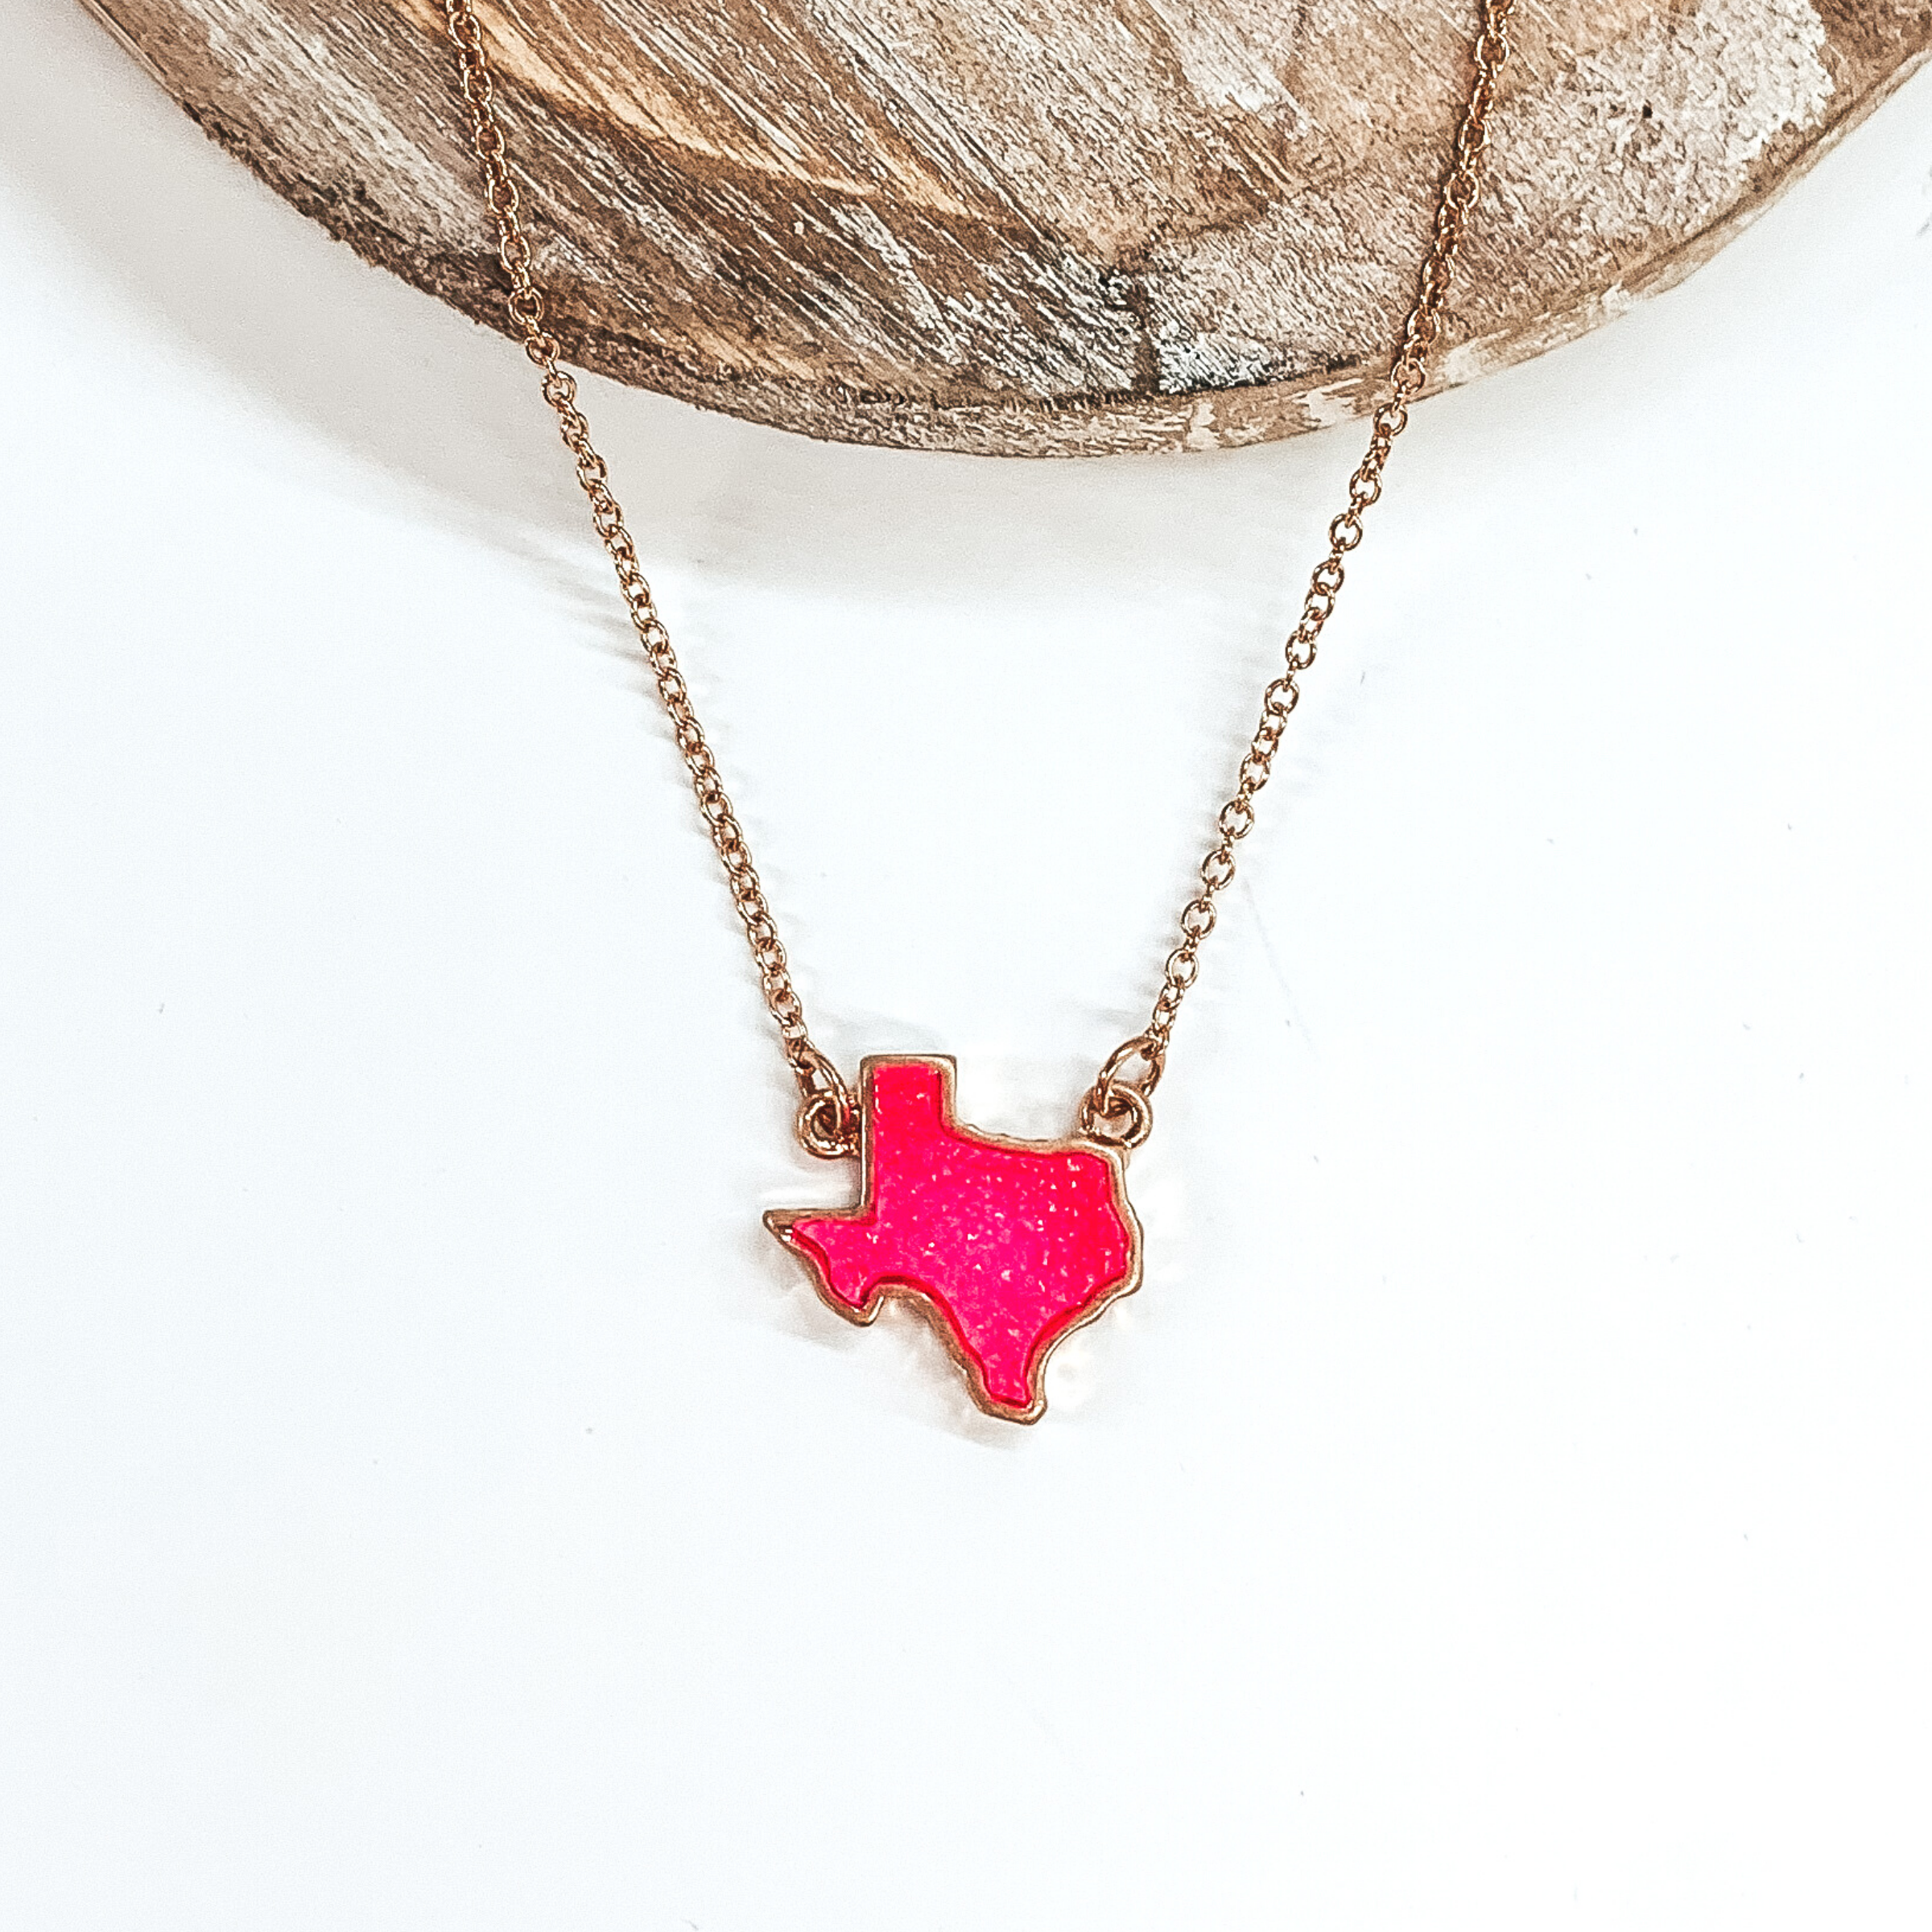 Tiny gold chained necklace includes a neon pink, druzy texas pendant that is outlined in gold. This necklace is pictured on a white background with a tan piece of wood at the top of the picture.